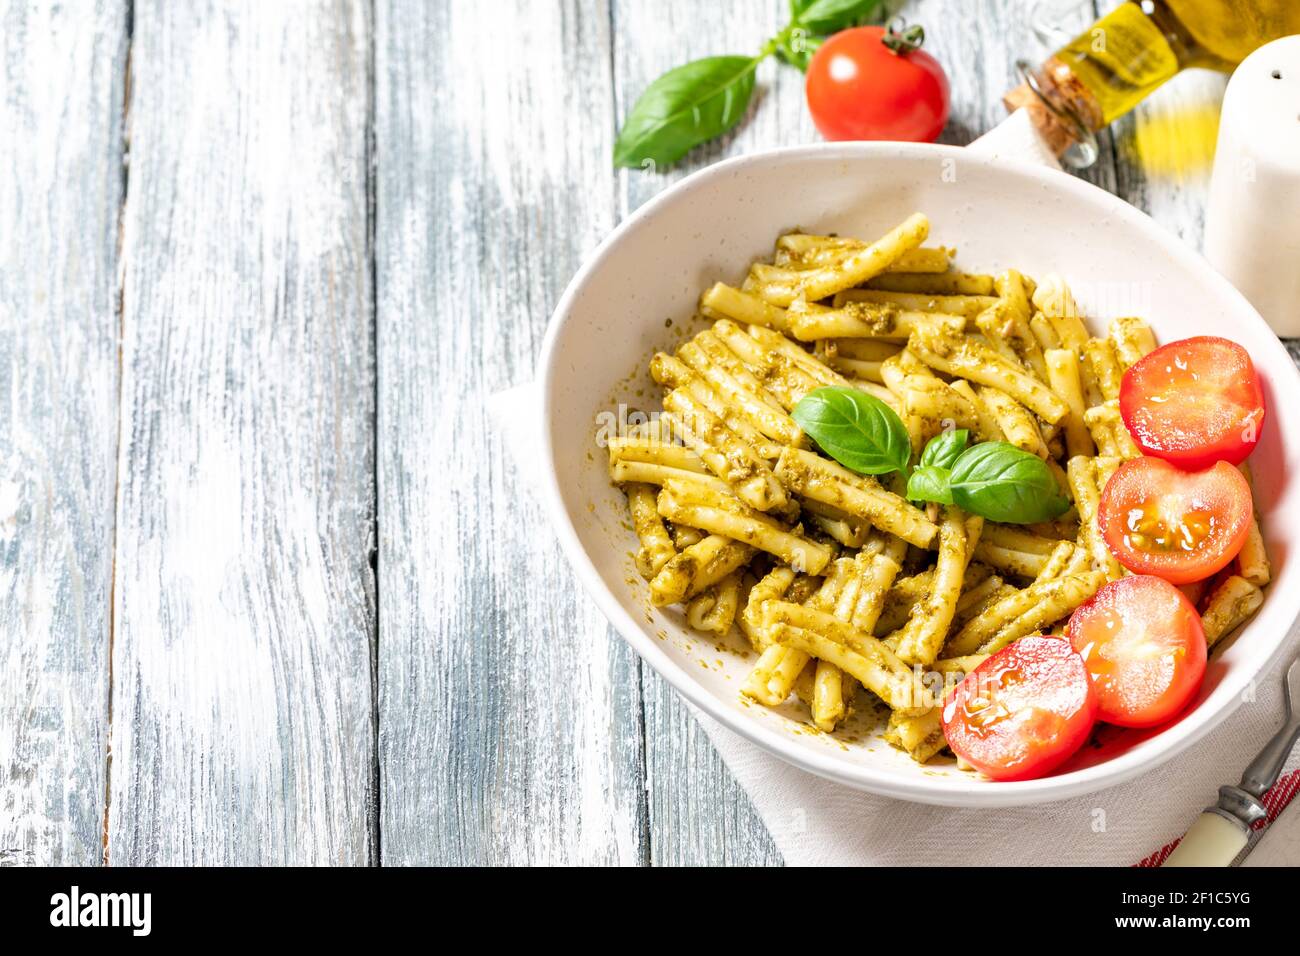 vegan pasta with homemade pesto sauce of basil, pine nuts and olive oil with cherry tomatoes. comfort food Stock Photo